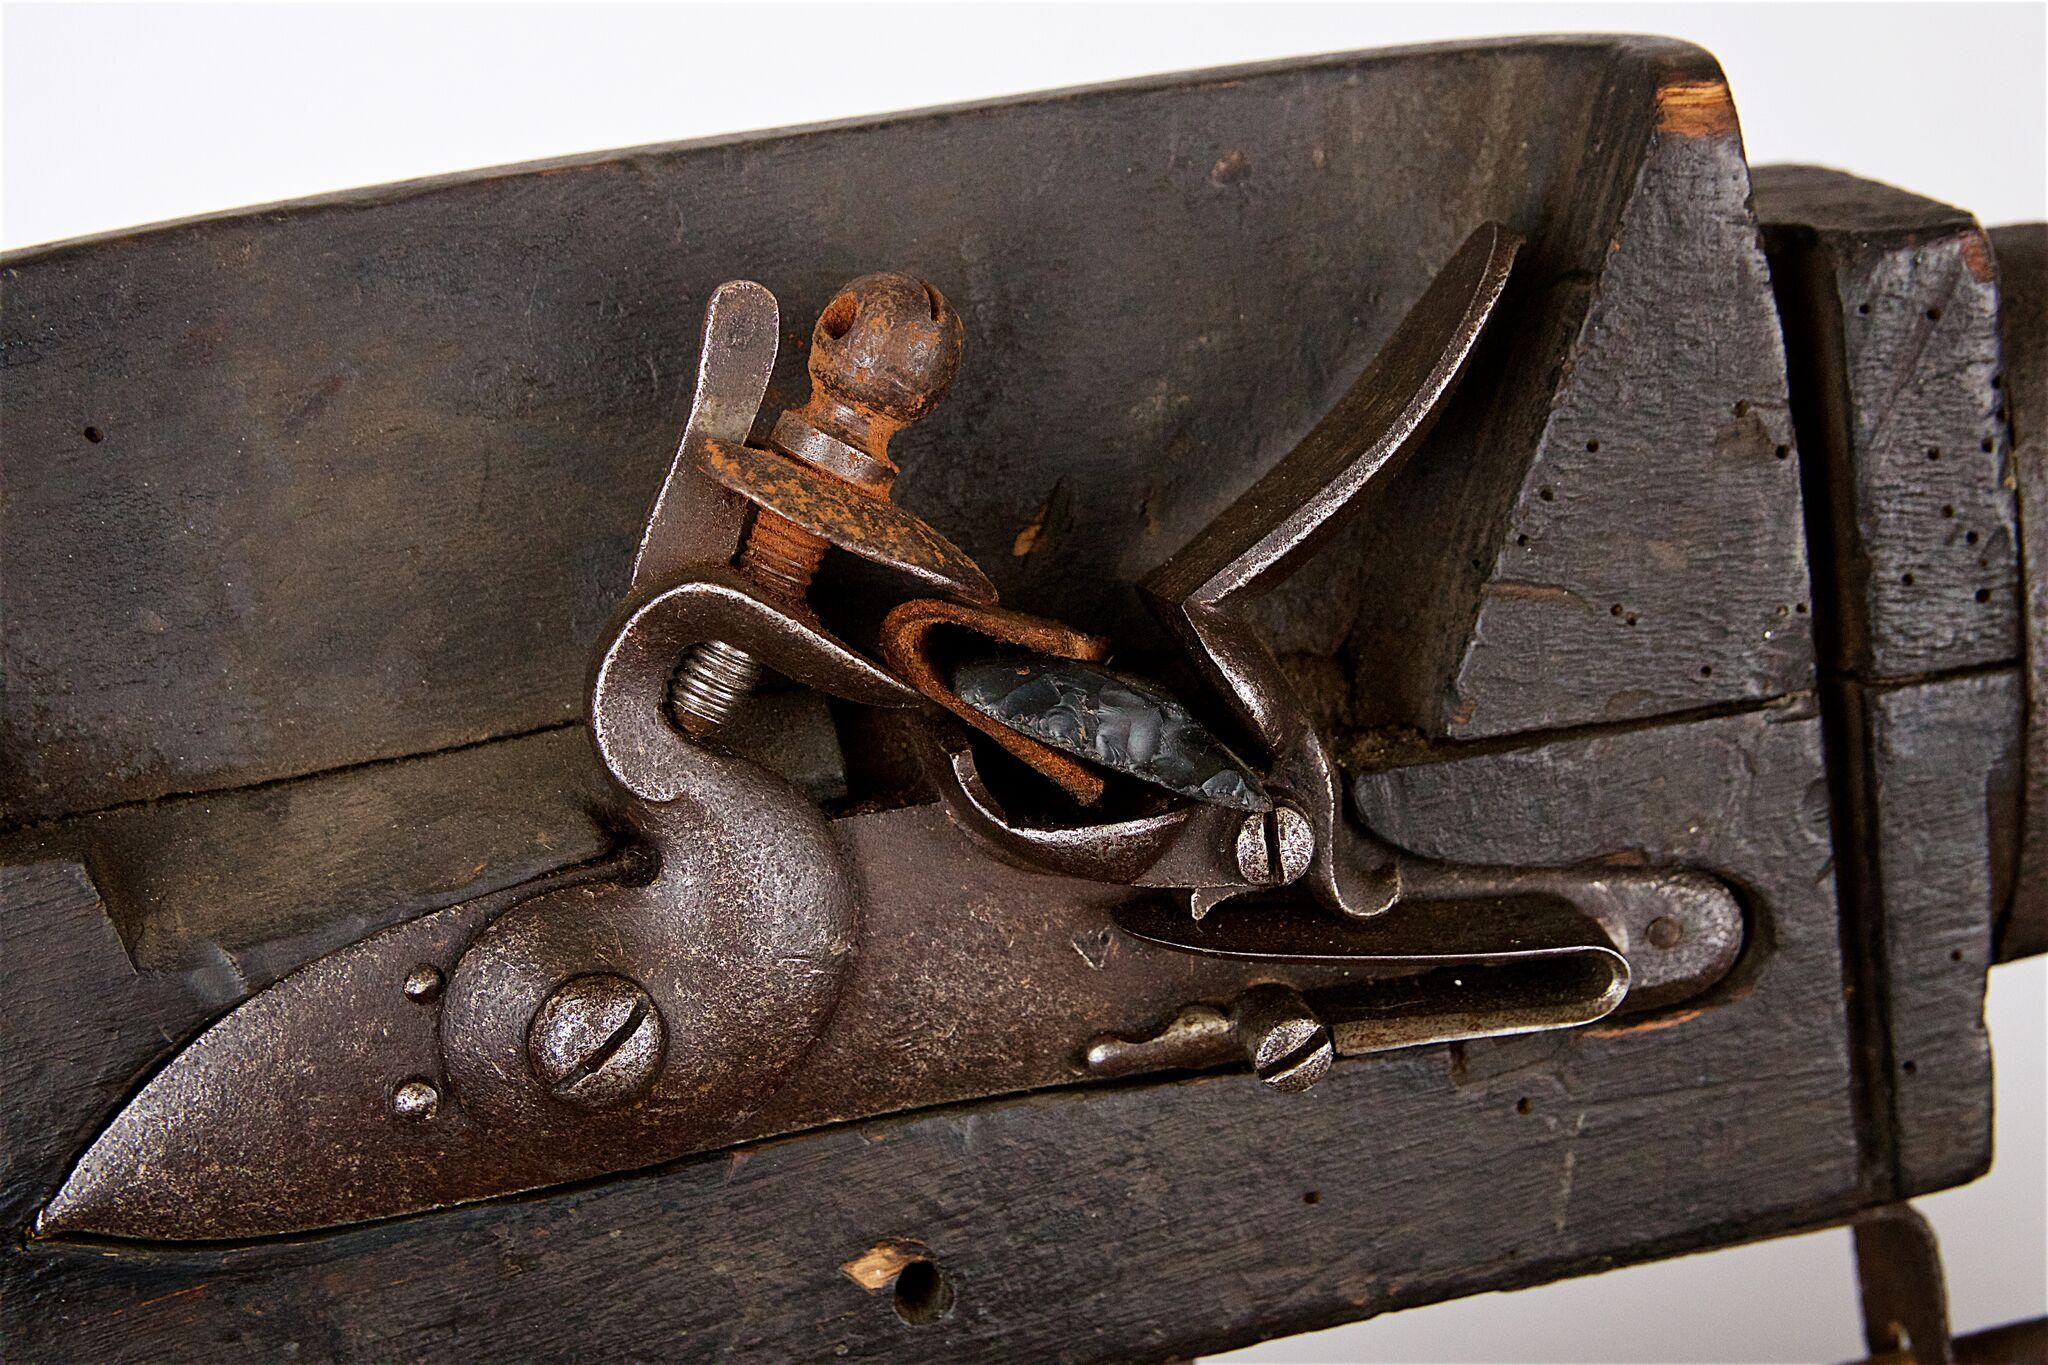 Flintlock alarm gun with simple flared blunderbuss style barrel and flint-fired musket lock mounted to an unusual wooden casing. The gun has an iron pintle underneath with a sliding trigger bar which allows the forward motion of a tripwire to pull